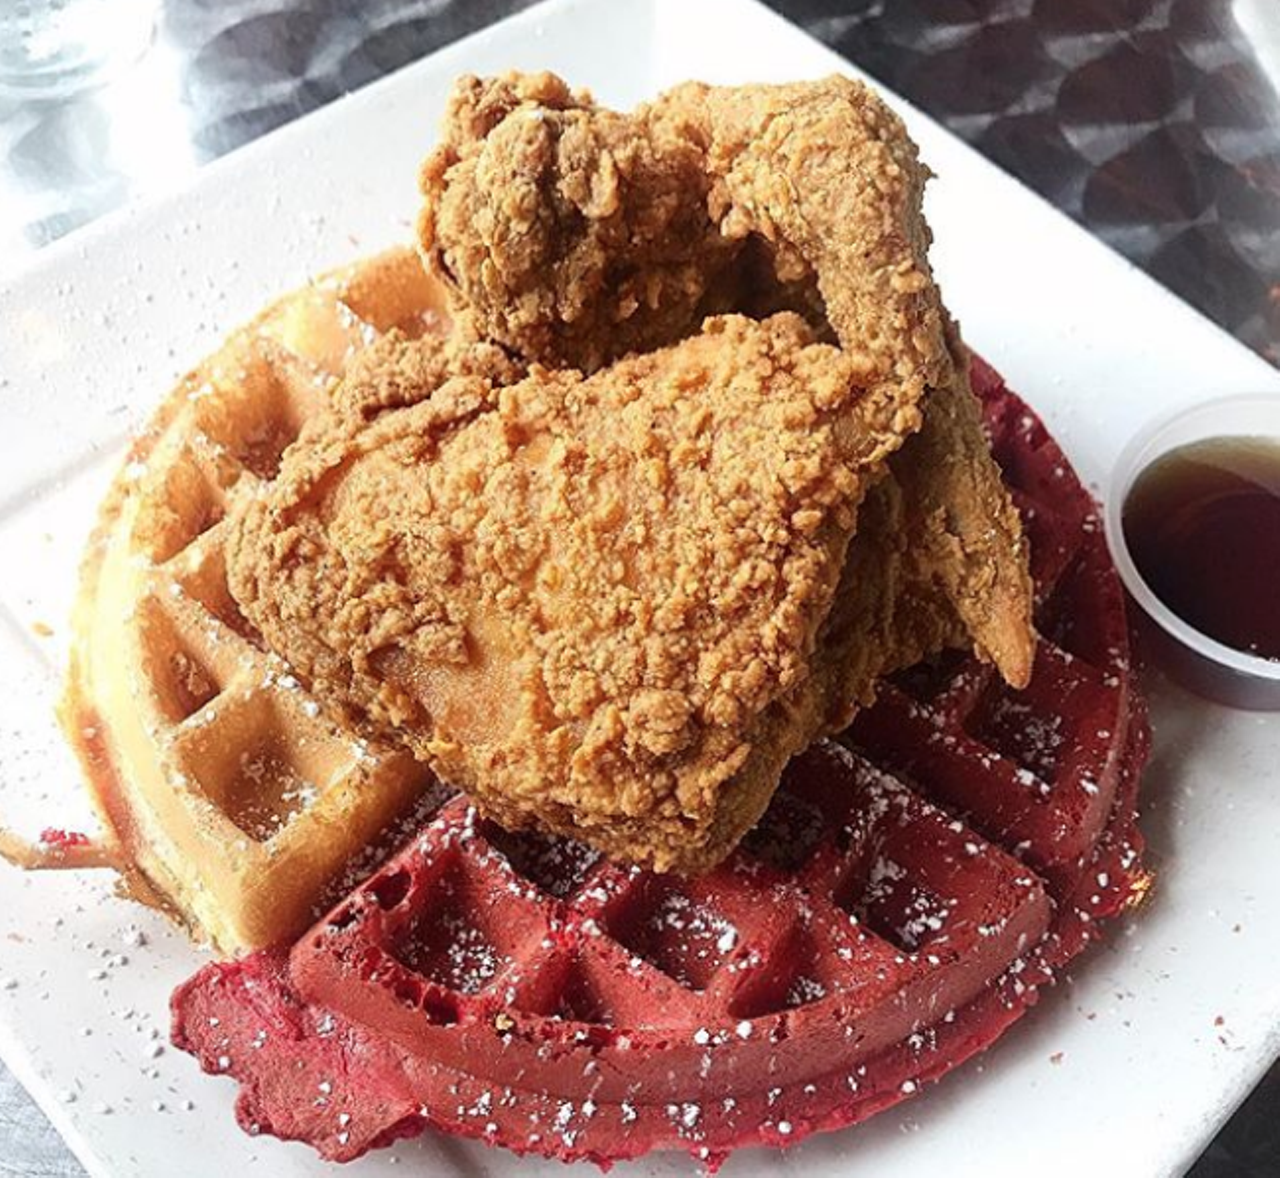 The South Chicken & Waffles
Multiple locations, thesouthsa.com
Prized for its chicken and waffles (duh) available with the original waffle or red velvet, The South has been serving up this goodness since its first location opened in 2017. You can thank owner Joshua Green for such deliciousness. Chicken lovers on-the-go can also score the same bites at the “express” location, which opened in 2018. The menu showcases other Southern treats such as Orleans oxtail grillades and a variety of grits pairings.
Photo via Instagram / foodiefeng